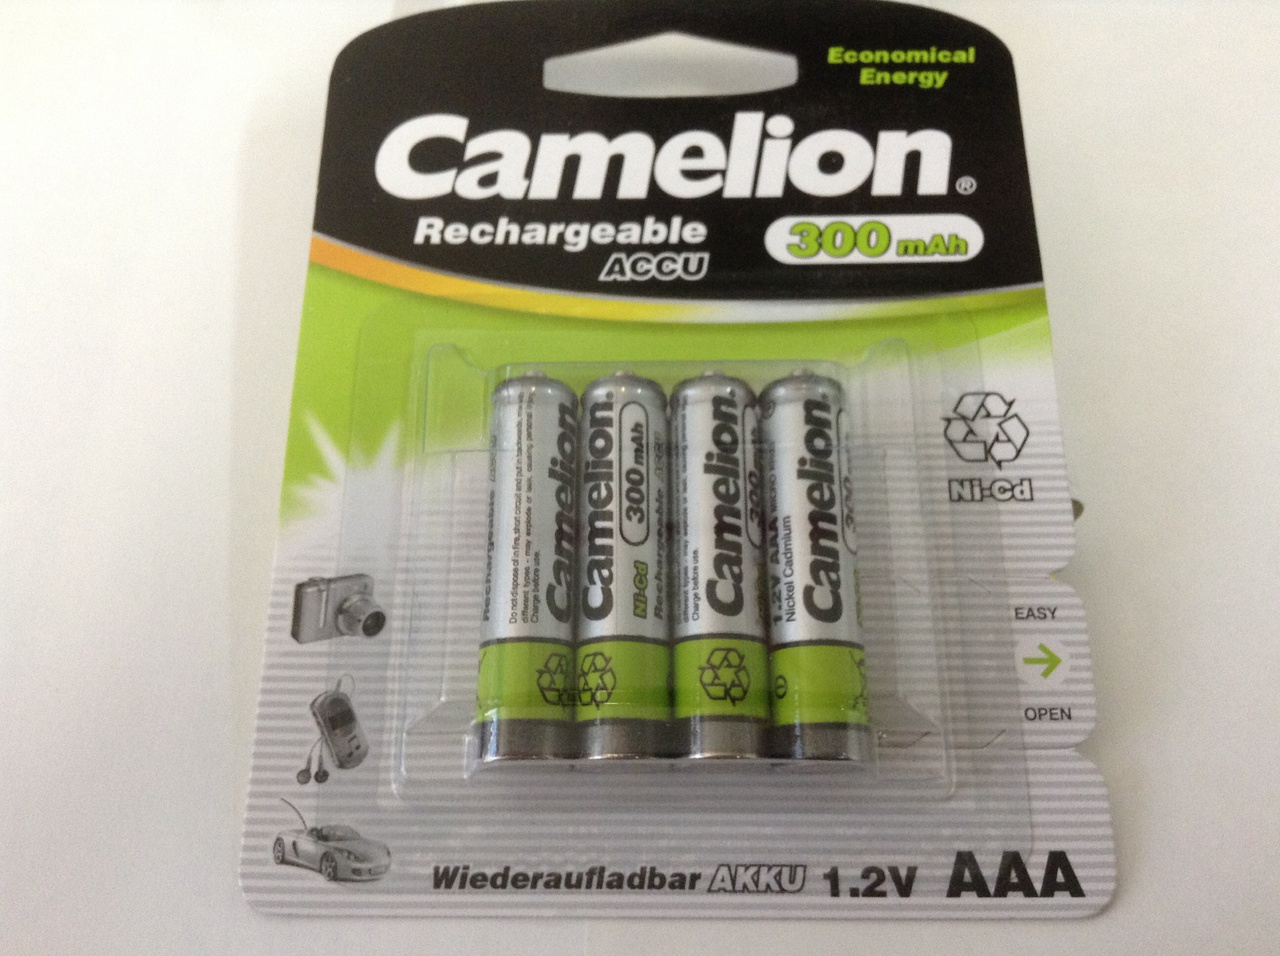 Camelion Economical Energy AAA Rechargeable NiCD Batteries 300mAh 8 Pack Retail + FREE SHIPPING!